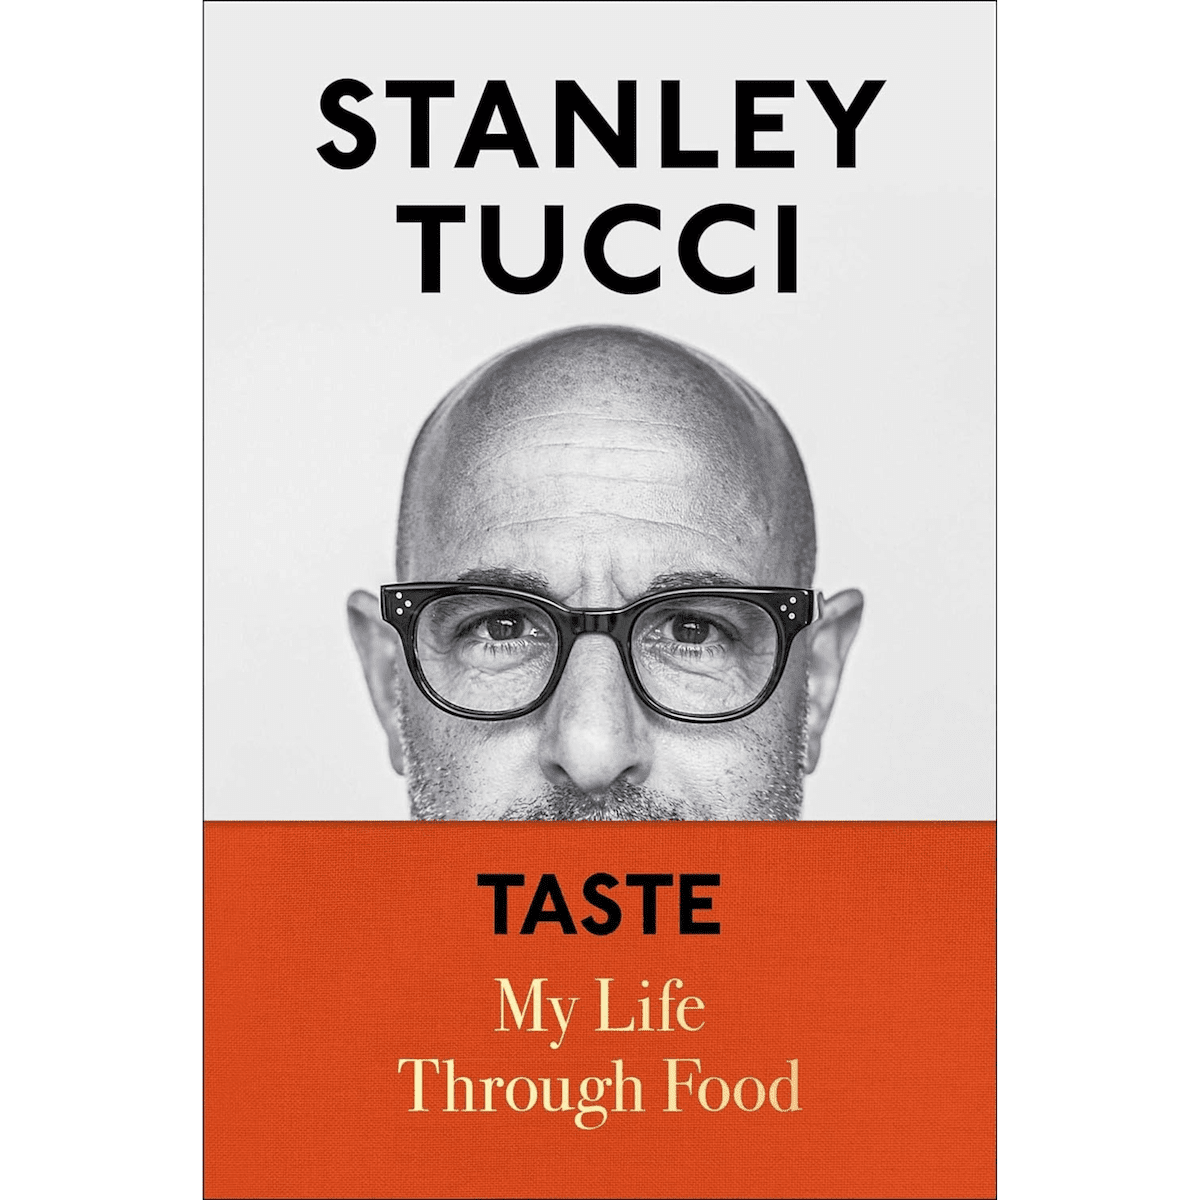 https://tarateaspoon.com/wp-content/uploads/2023/10/Taste-by-Stanley-Tucci-resized.png